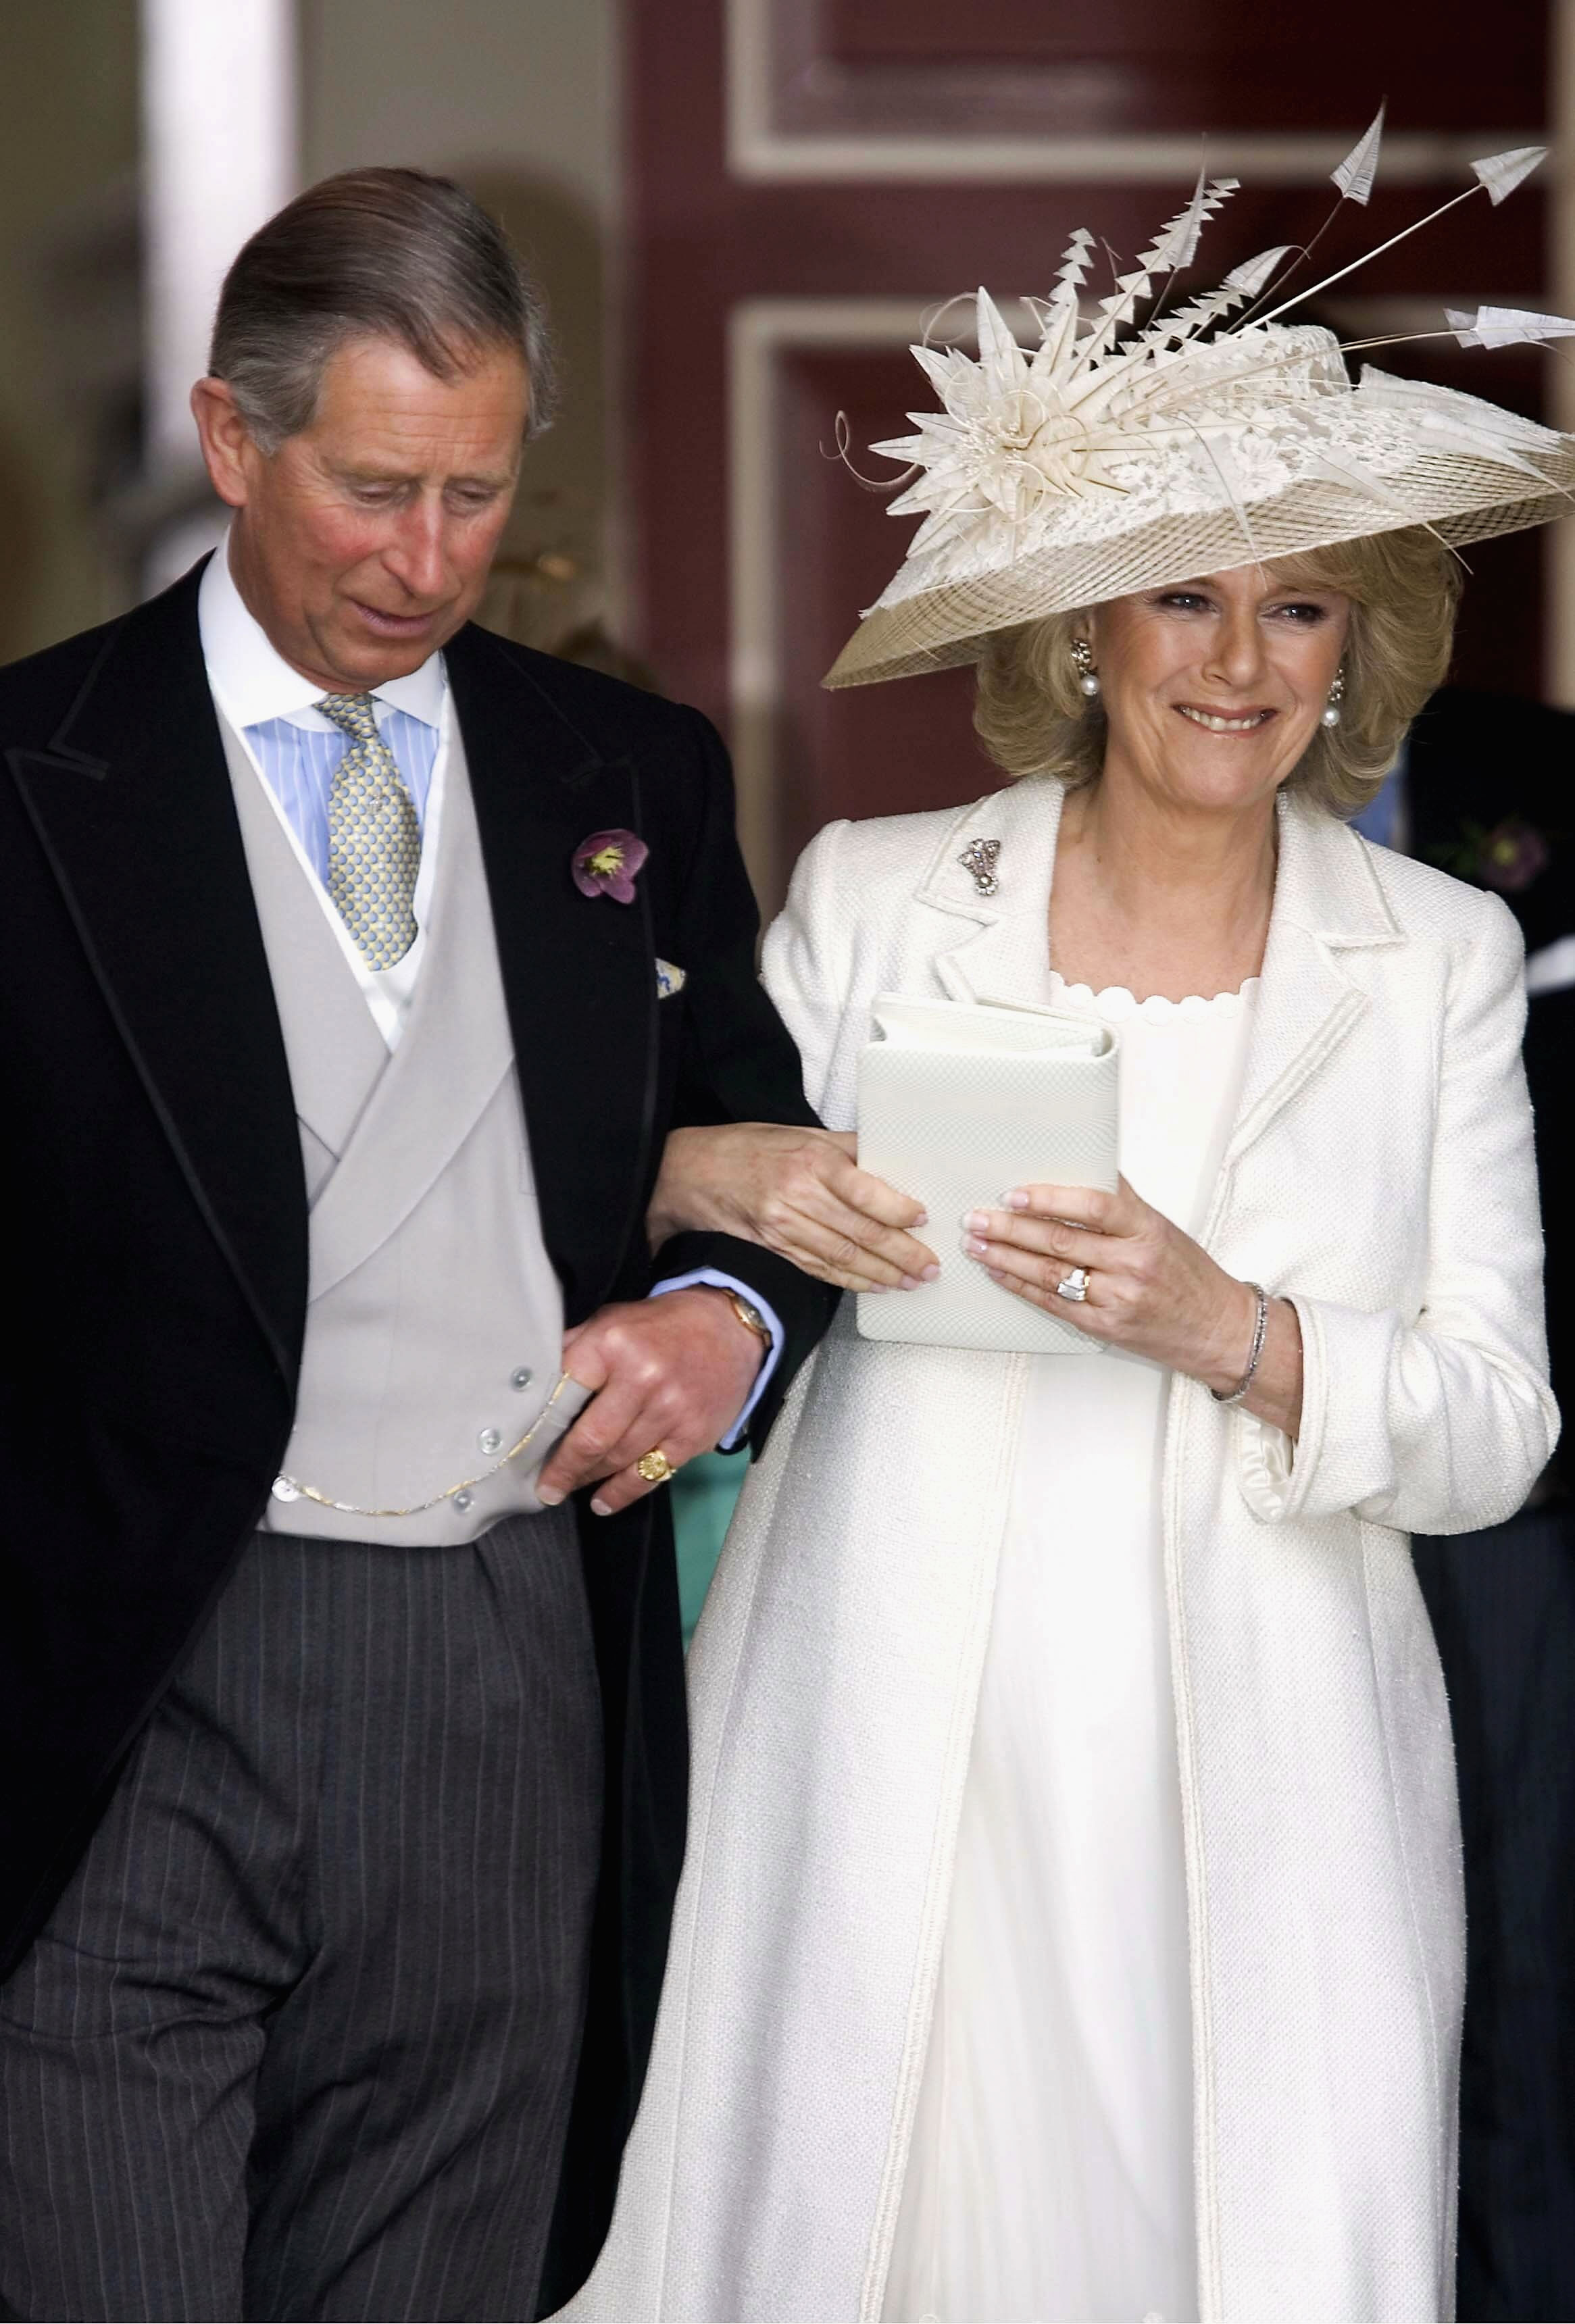 King Charles and his wife Camilla leave the Civil Ceremony for their marriage at The Guildhall, Windsor on April 9, 2005 in Berkshire, England | Source: Getty Images